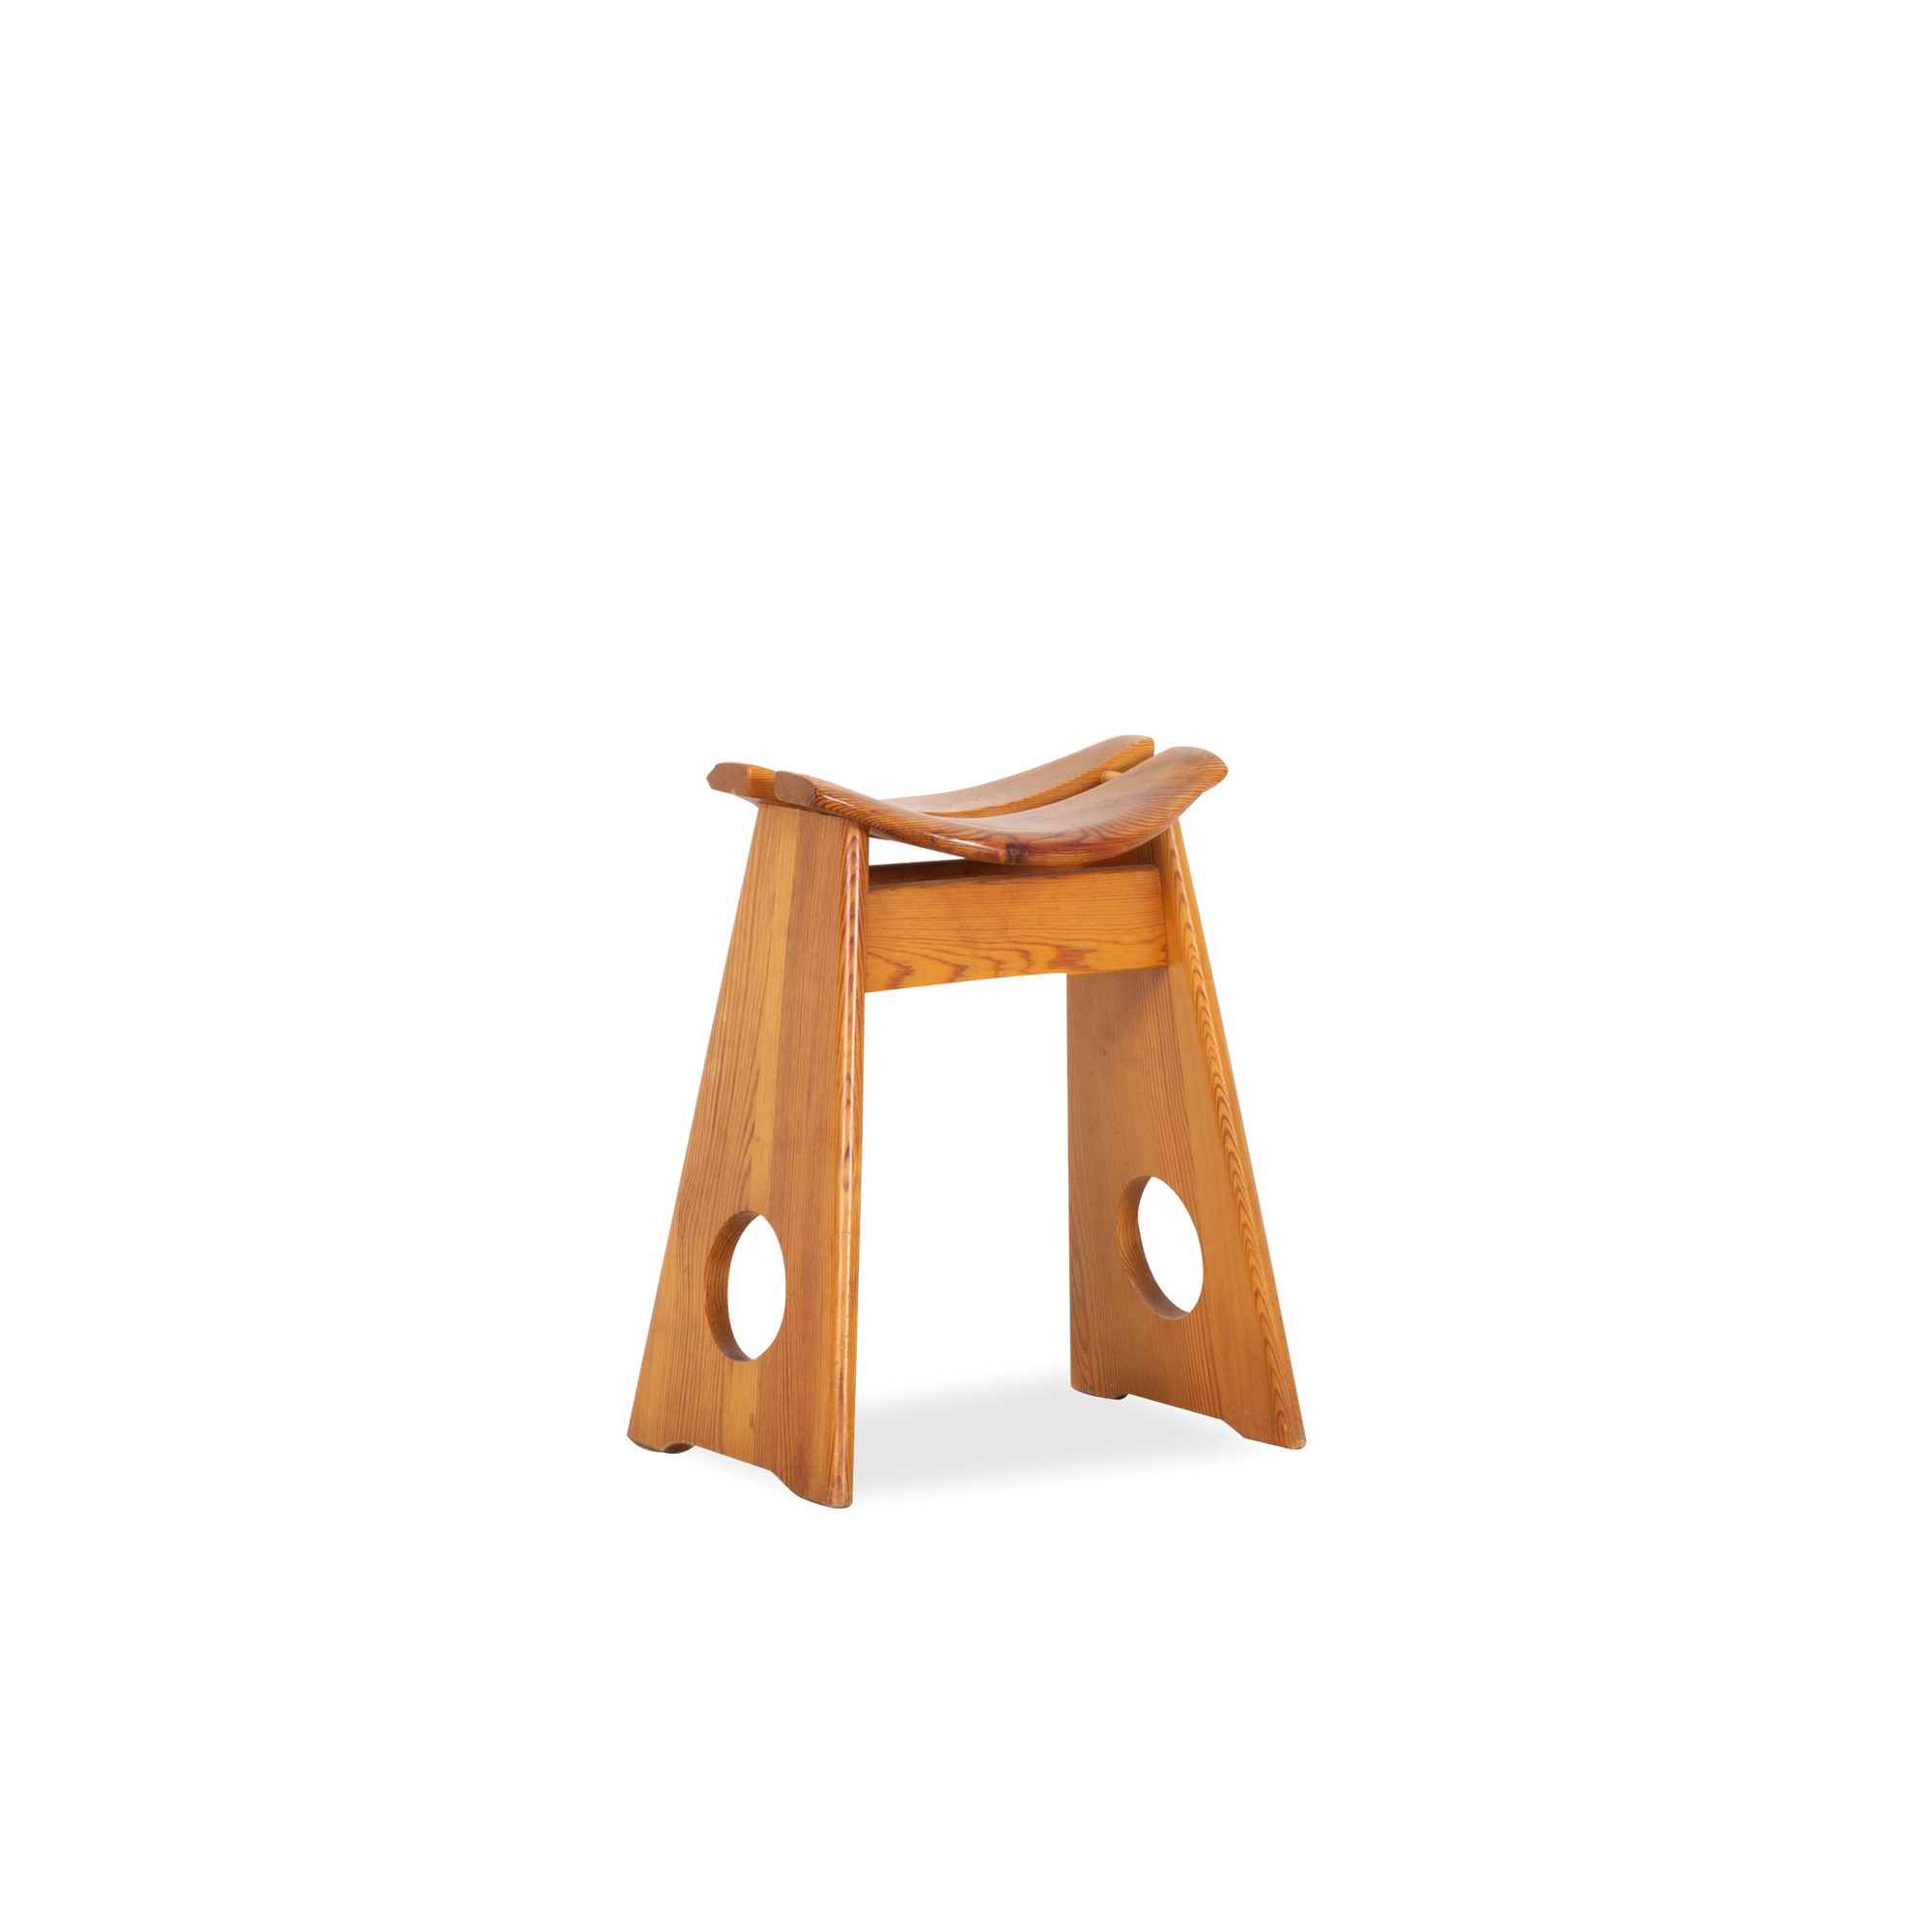 Subtle yet bold, this vintage stool was designed by Gilbert Marklund for Furusnickarn AB, circa 1970s.